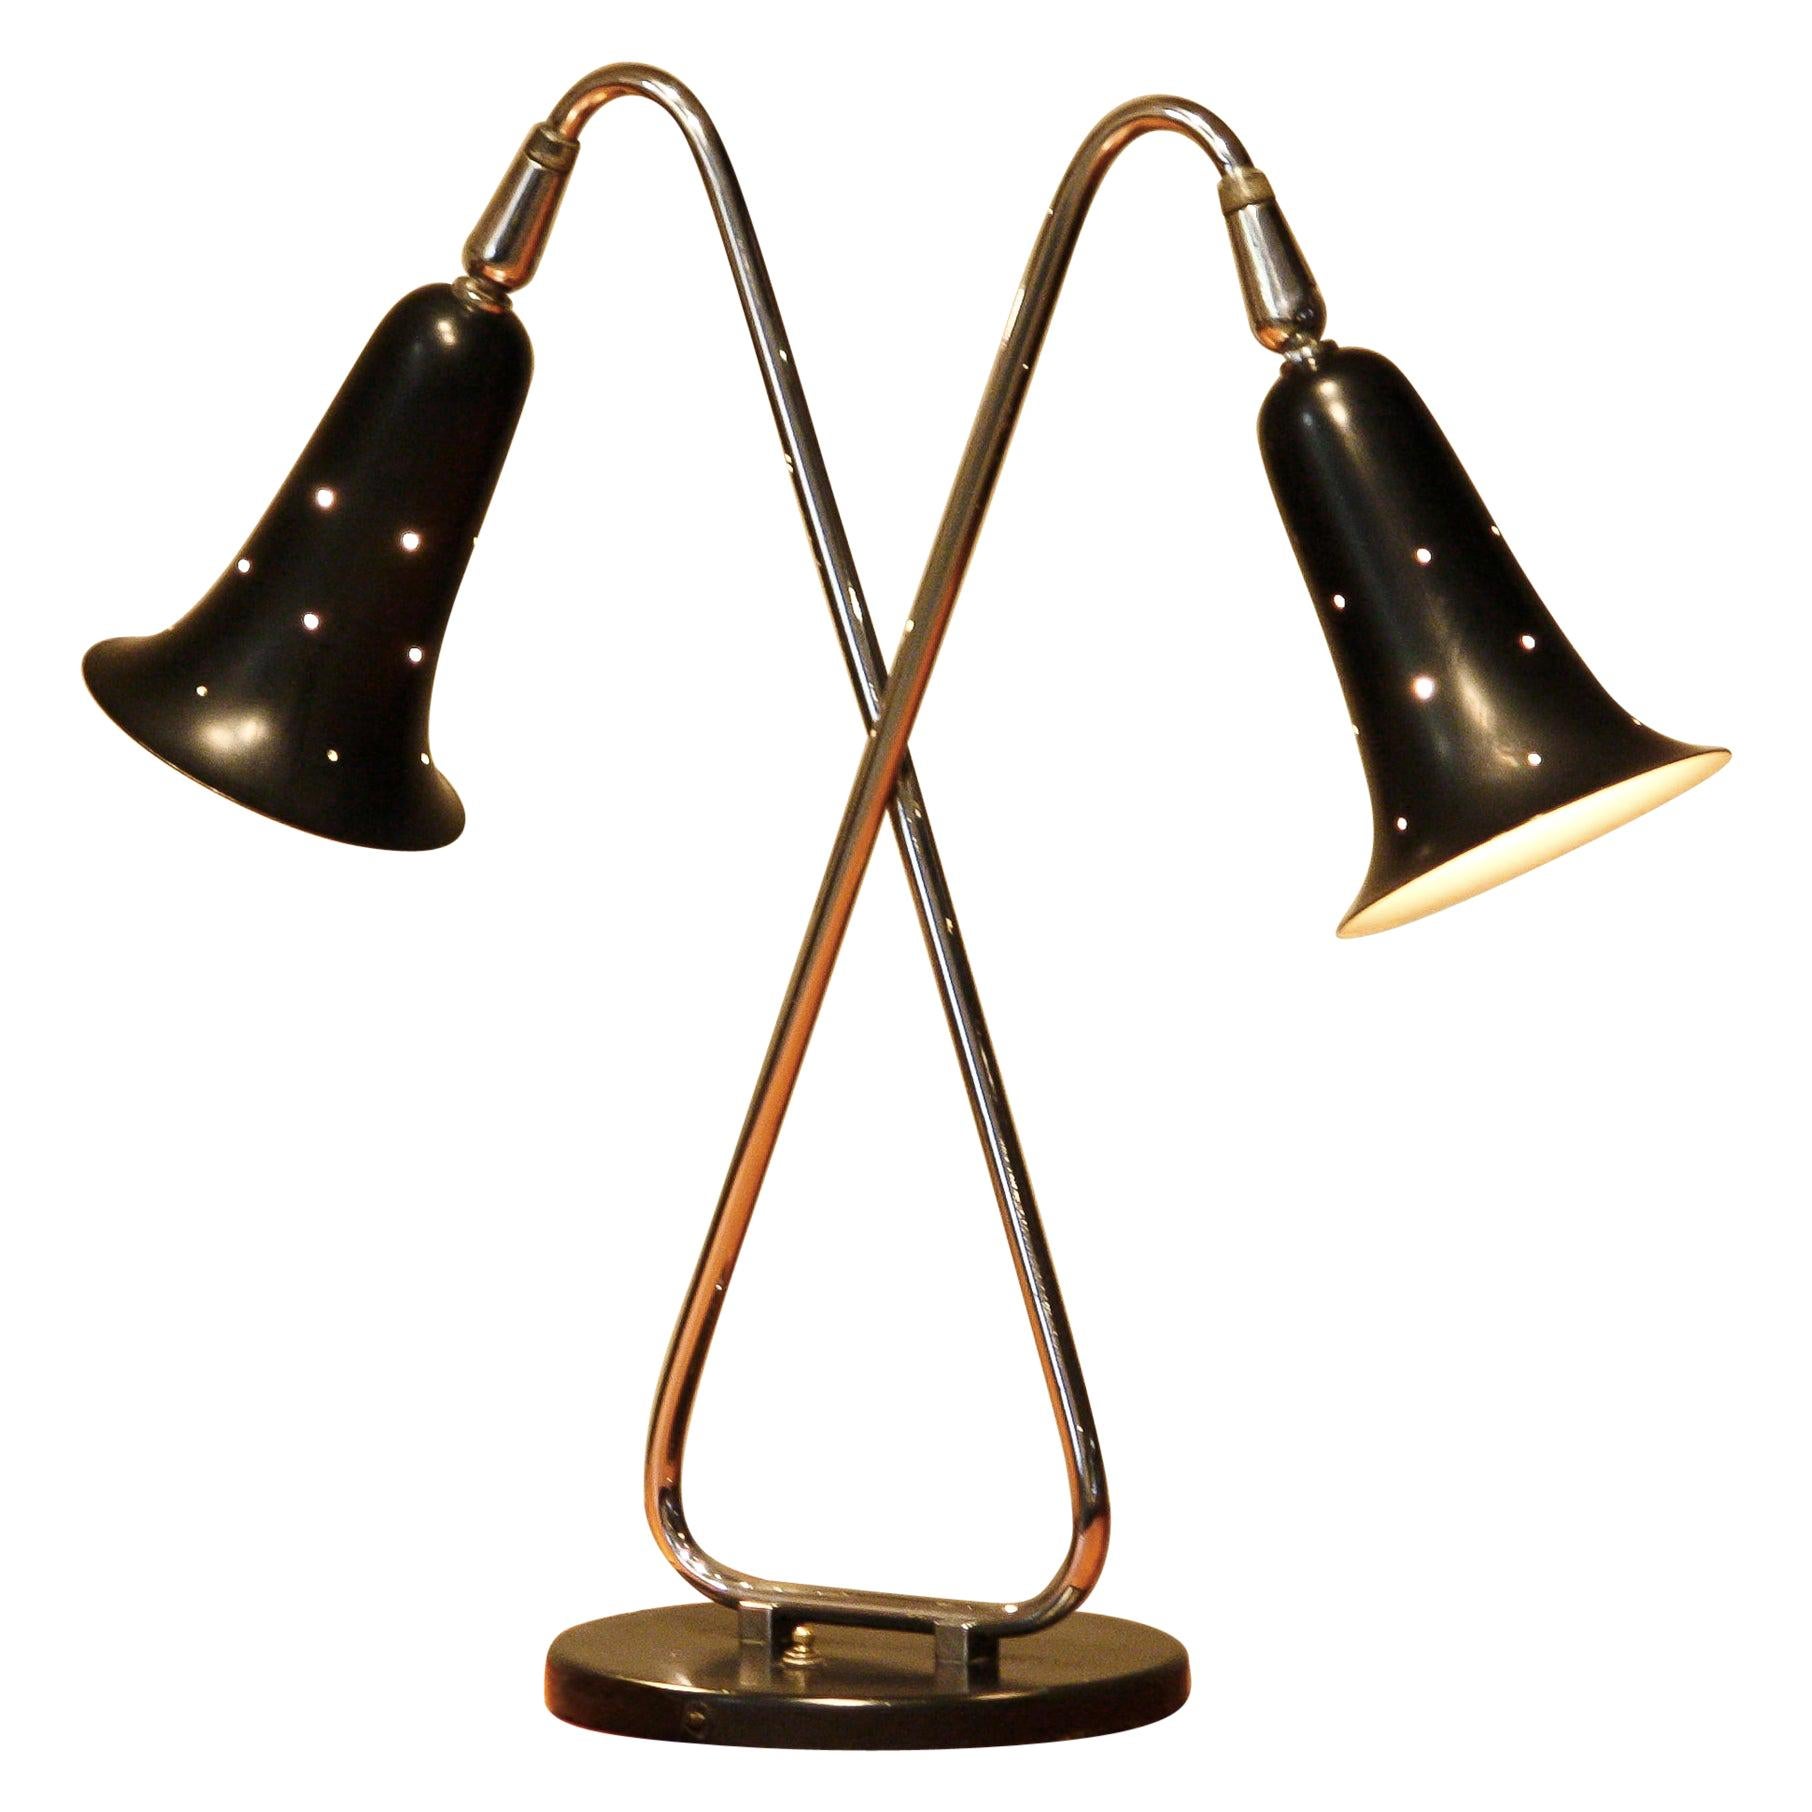 Extremely beautiful black lacquered and chromed metal desk/table lamp, made in the USA, 1950s.
Technically 100% and in good and original condition. Two bulbs E26 / E27 size.
Period: 1950s.
The dimensions for the shades are: ø14 cm / 5.5 inch, H18